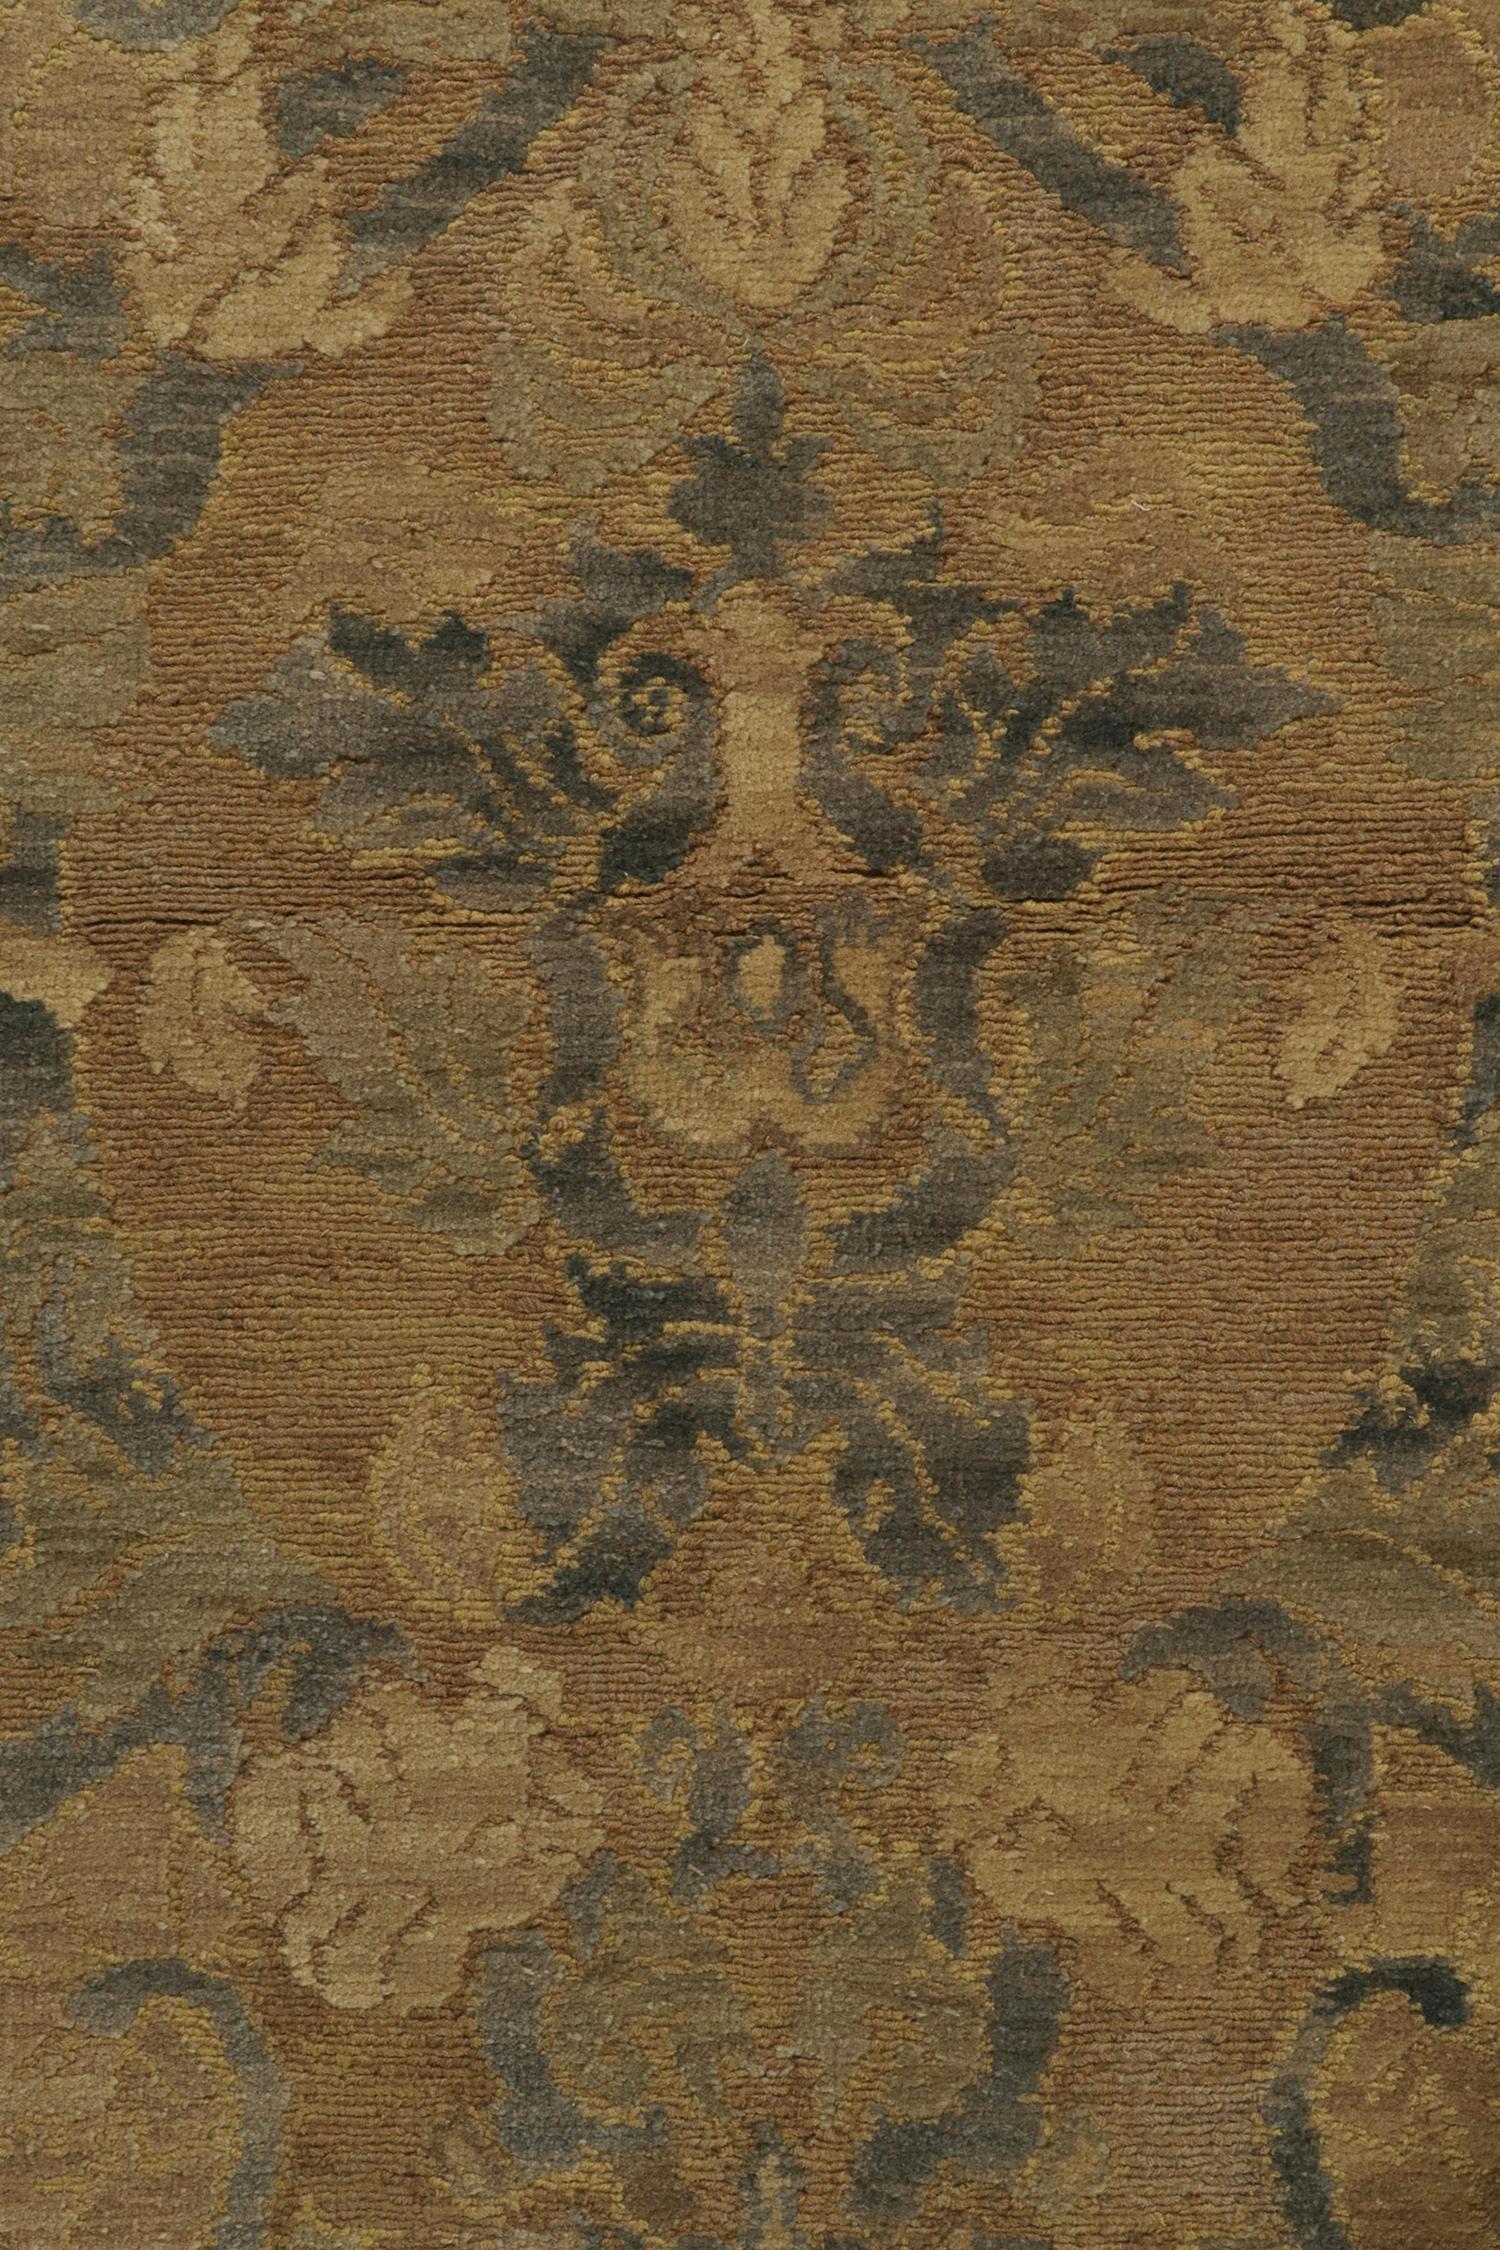 Rug & Kilim’s Arts & Crafts Style Rug in Beige-Brown and Blue Floral Patterns In New Condition For Sale In Long Island City, NY